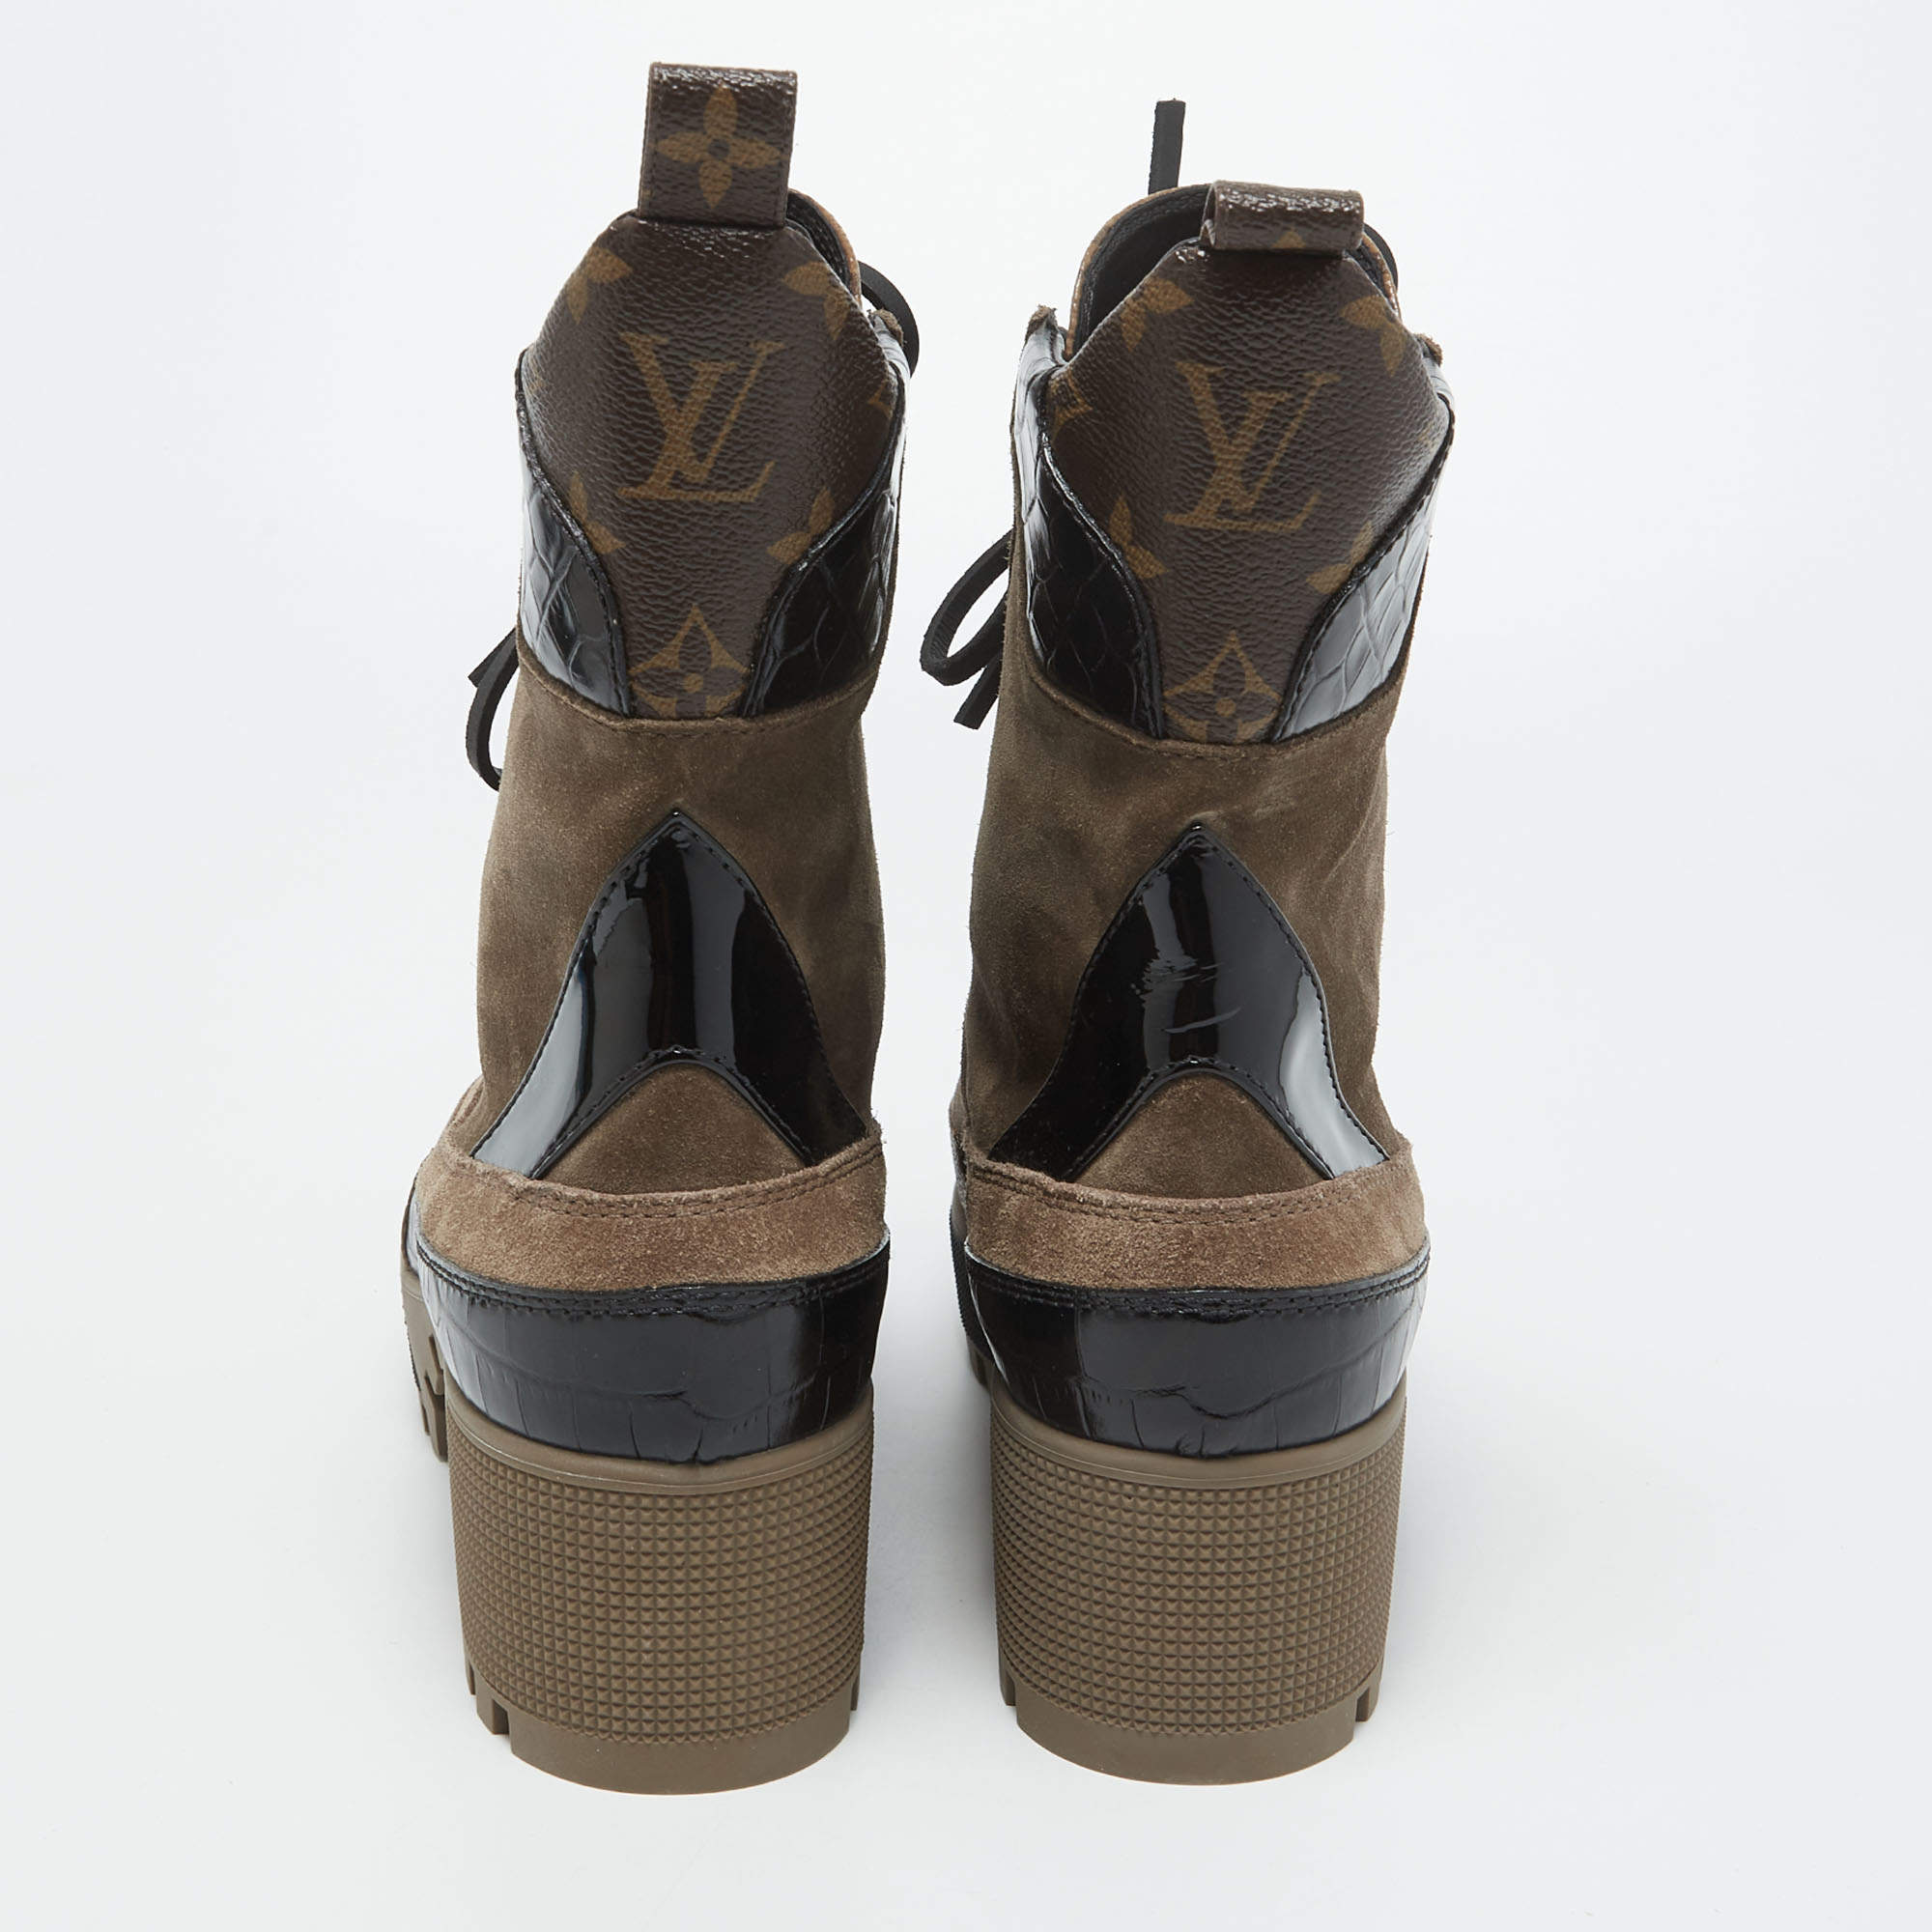 Louis Vuitton Brown Suede and Monogram Canvas Laureate Ankle Boots Size 38.5